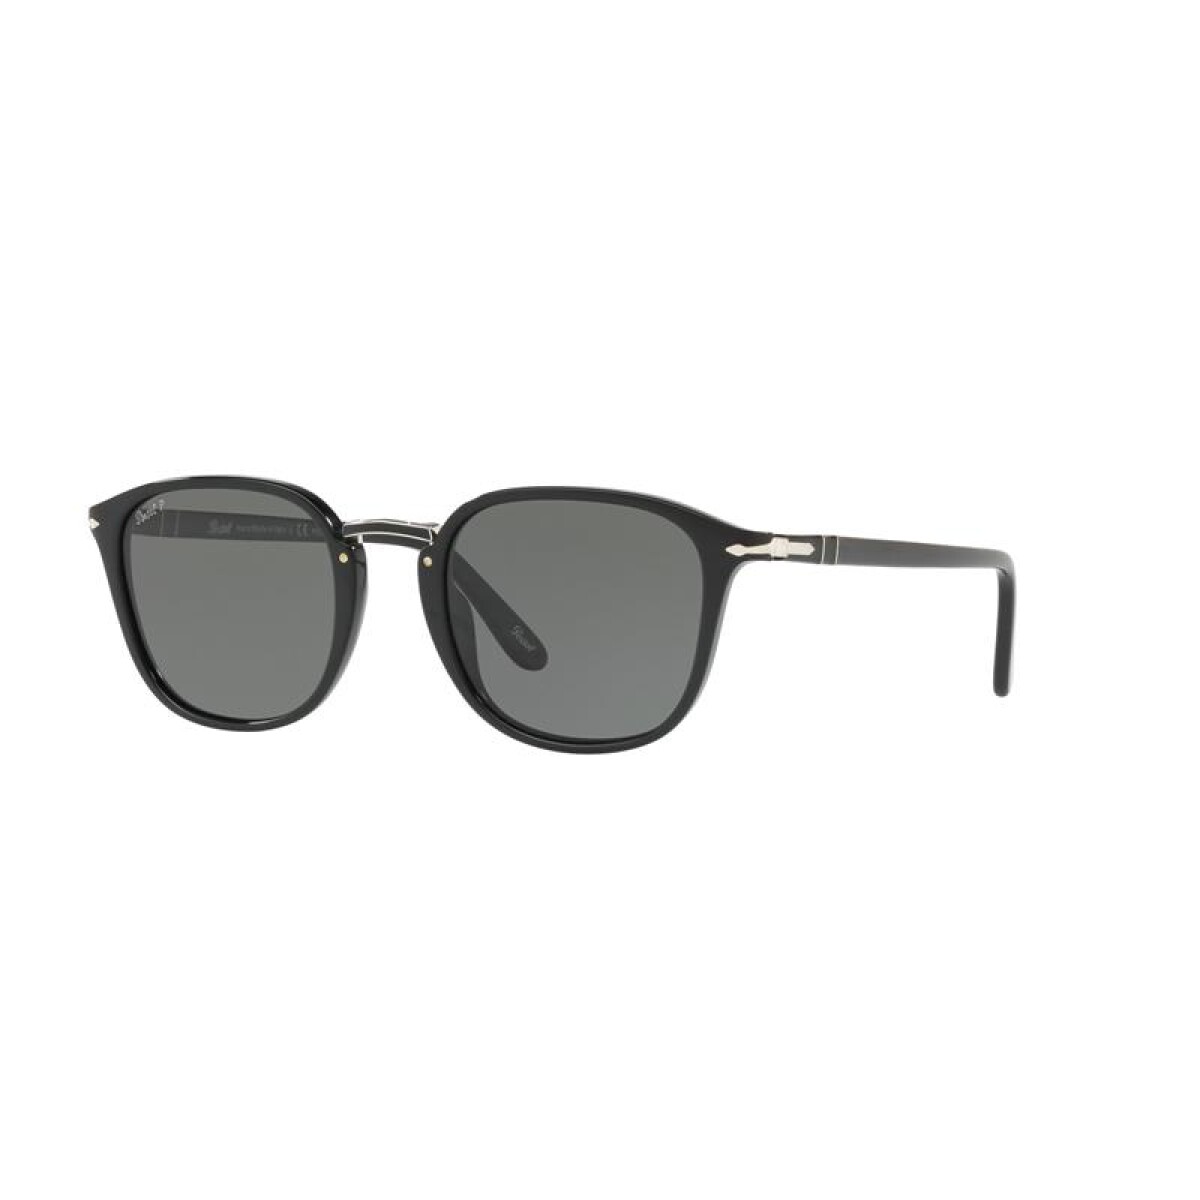 Persol 3186-s - 95/58 